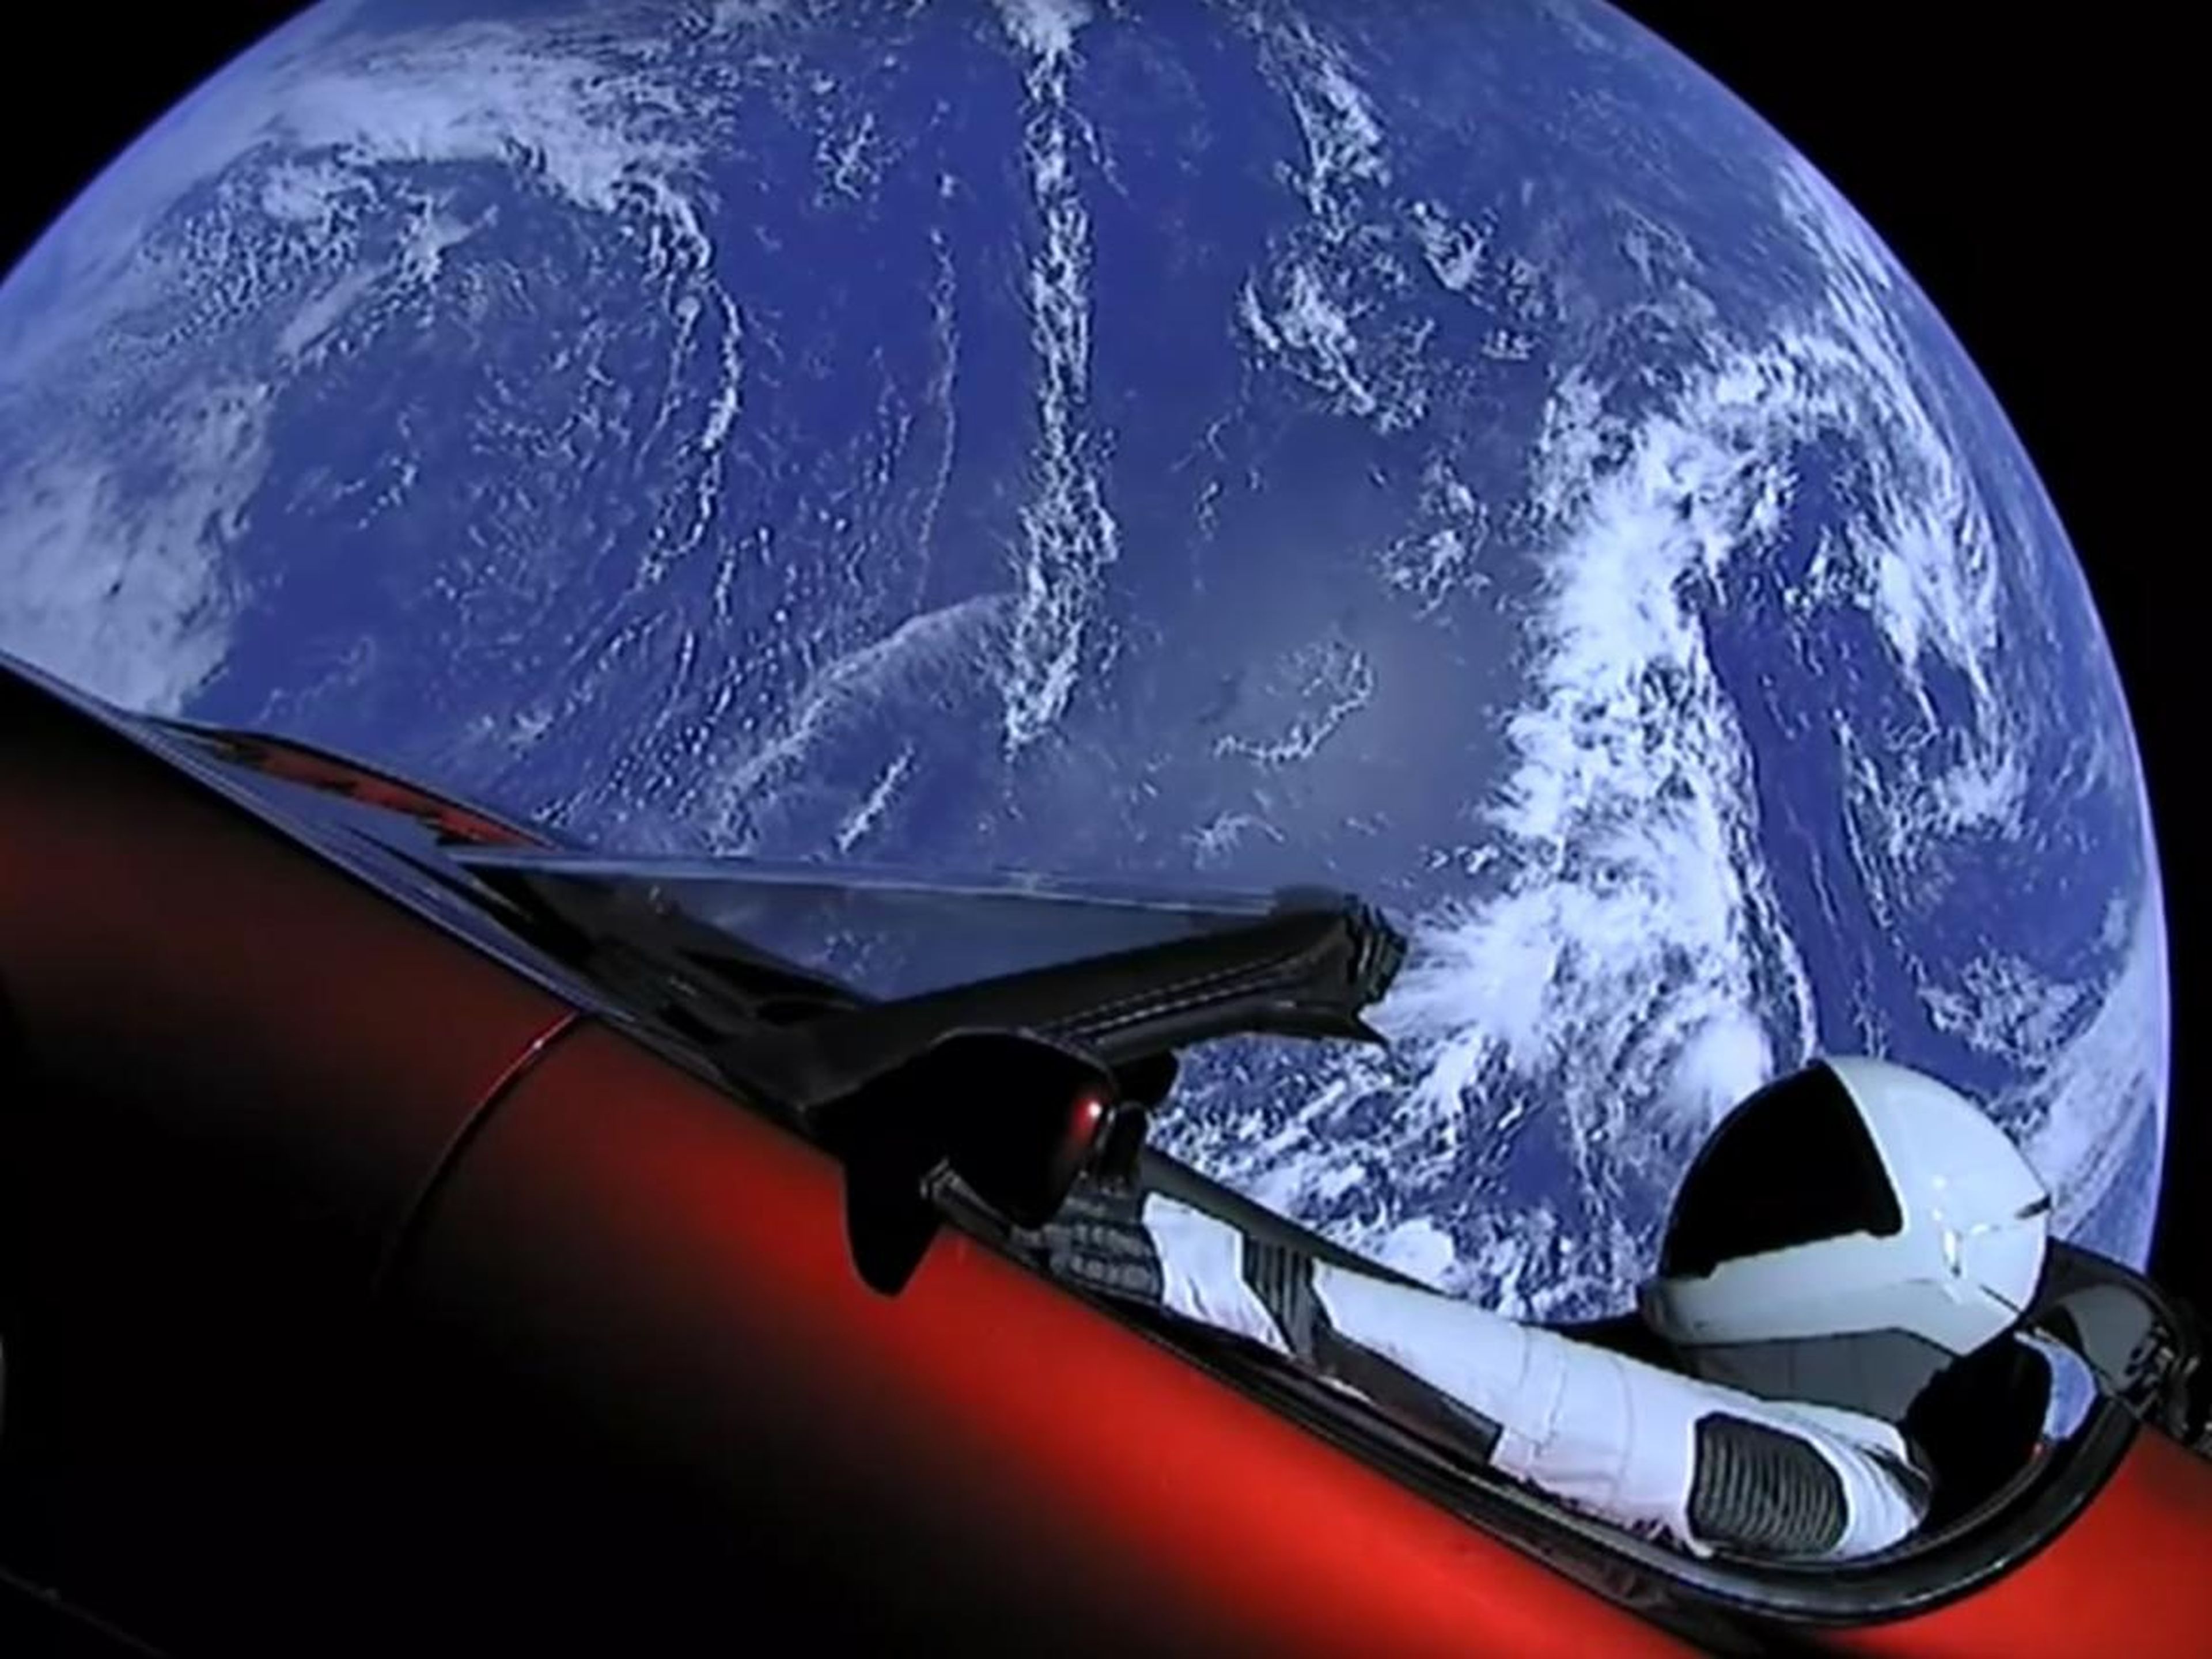 The payload on that Falcon Heavy rocket was Musk's red Tesla Roadster, complete with a dummy driver and a note on the dash: "DON'T PANIC!"